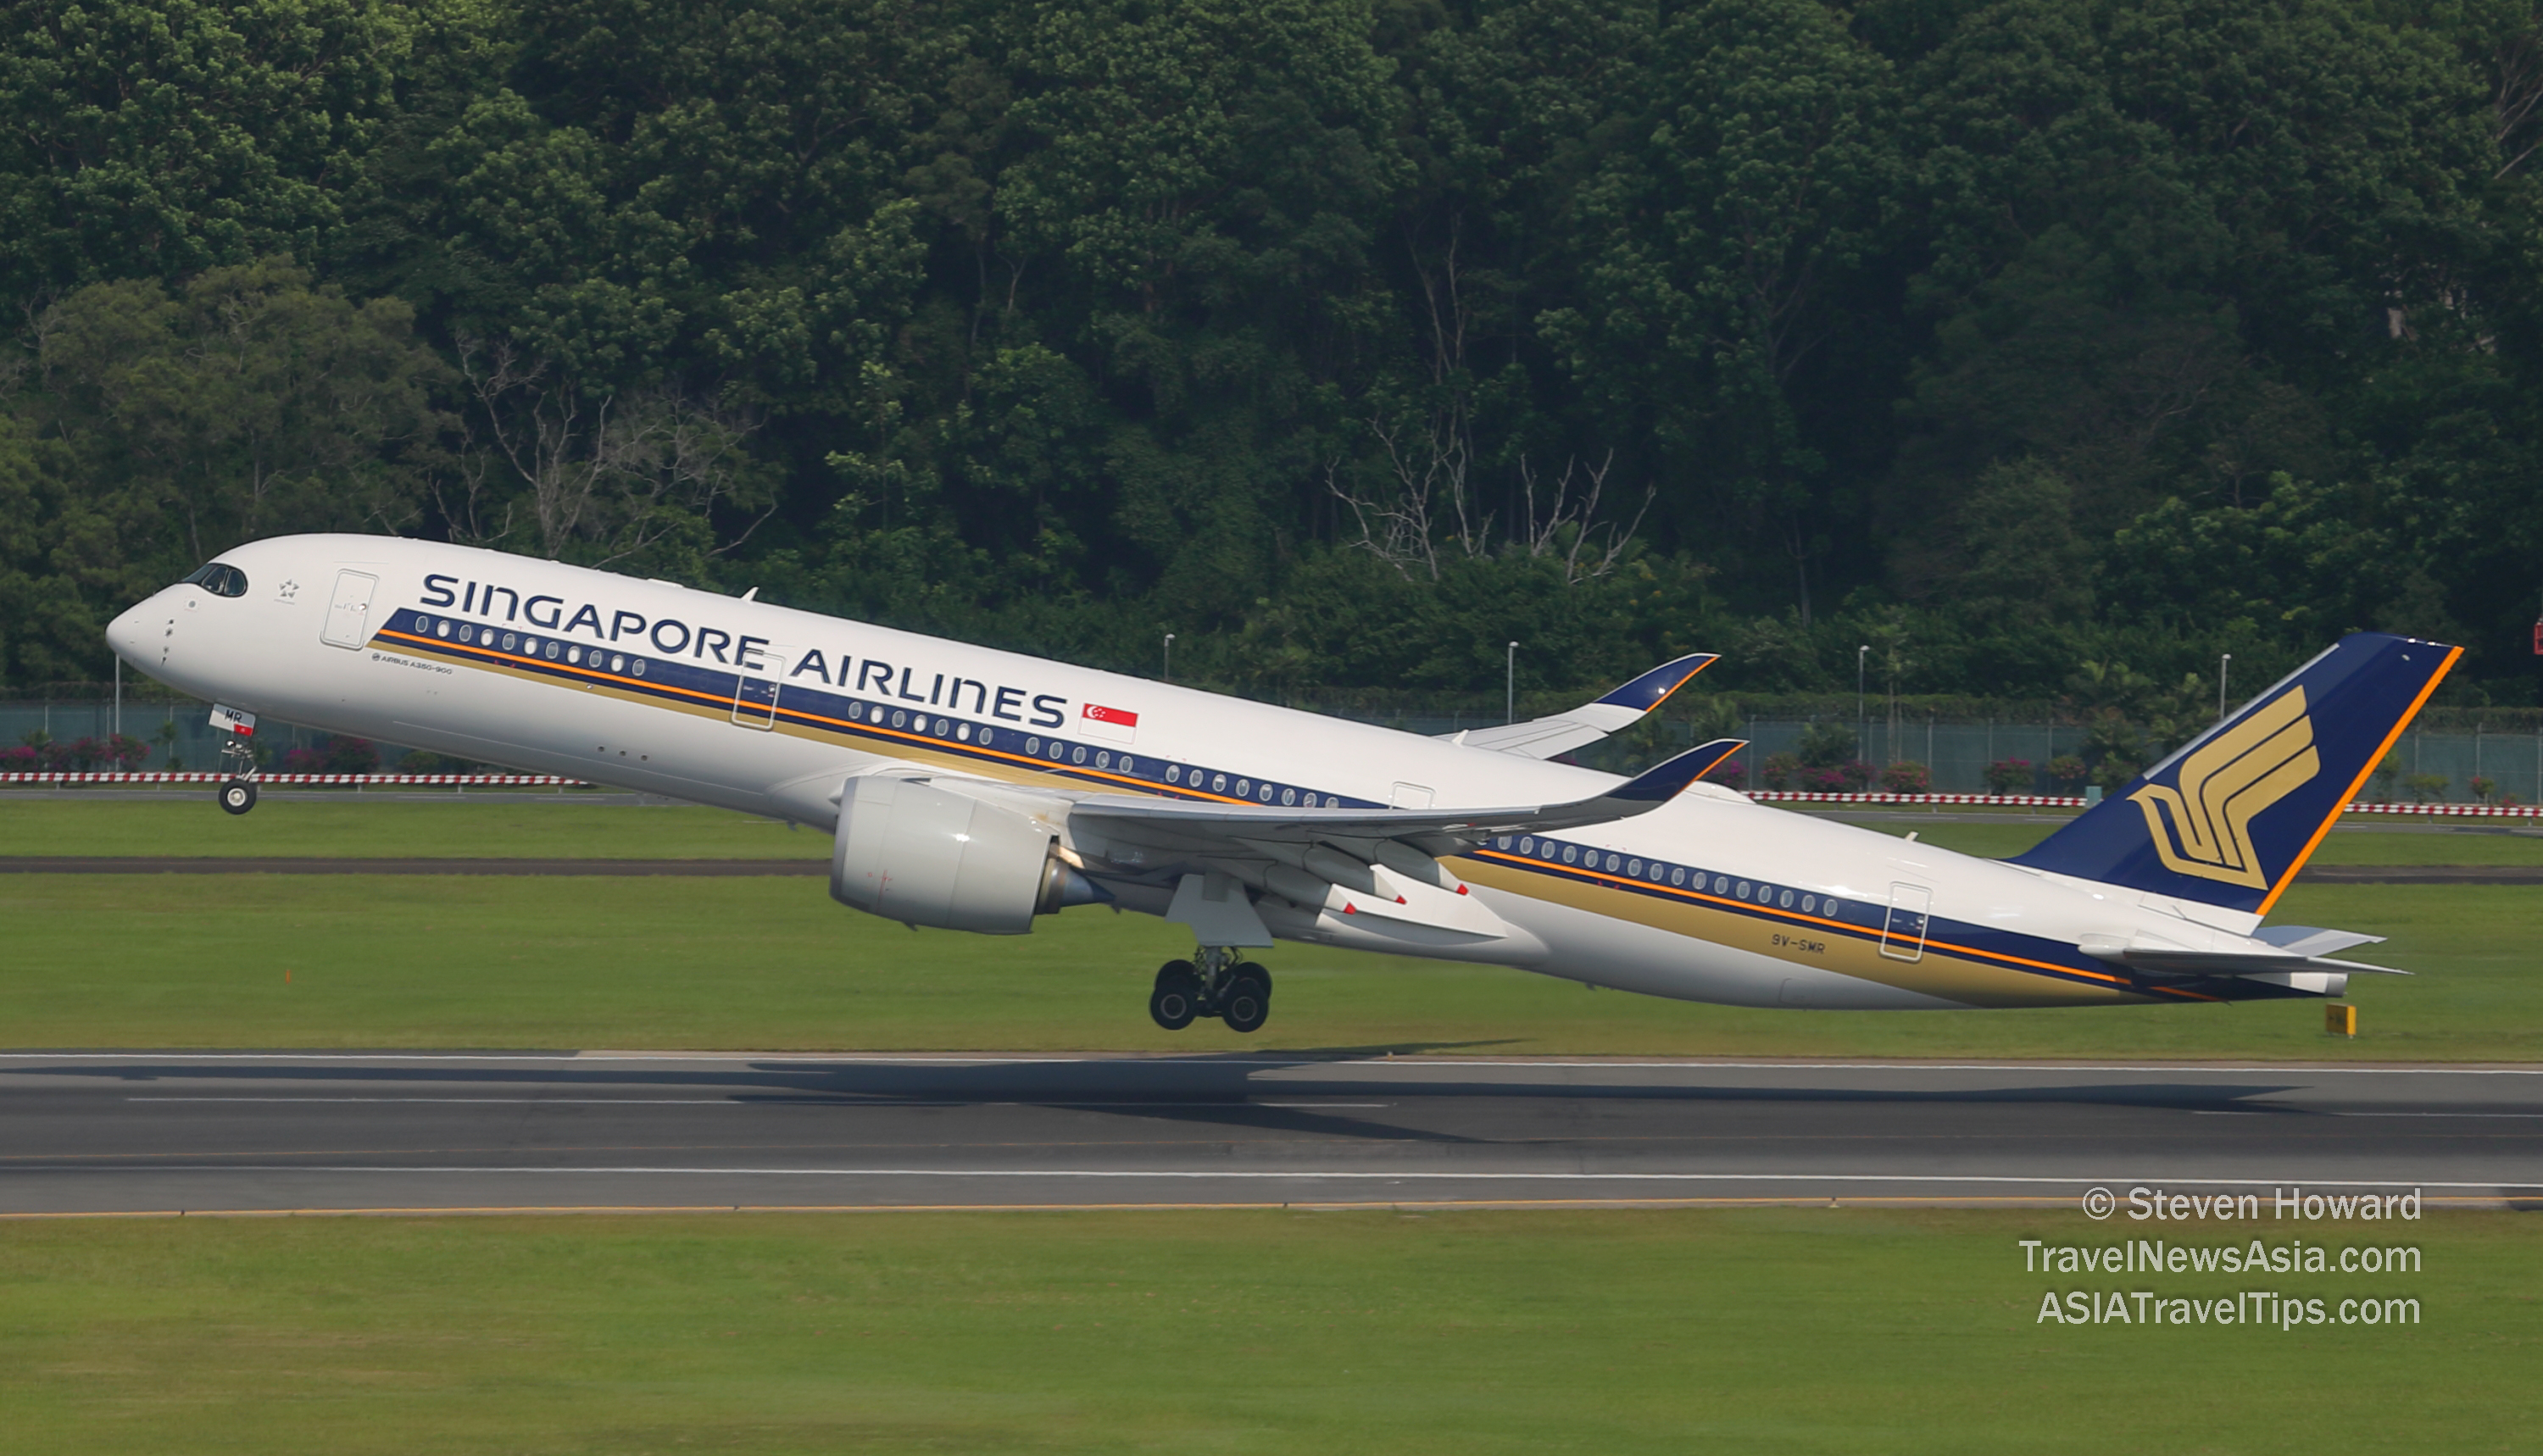 Singapore Airlines Airbus A350-900 reg: 9V-SMR taking off from Changi Airport in Singapore. Picture by Steven Howard of TravelNewsAsia.com Click to enlarge.